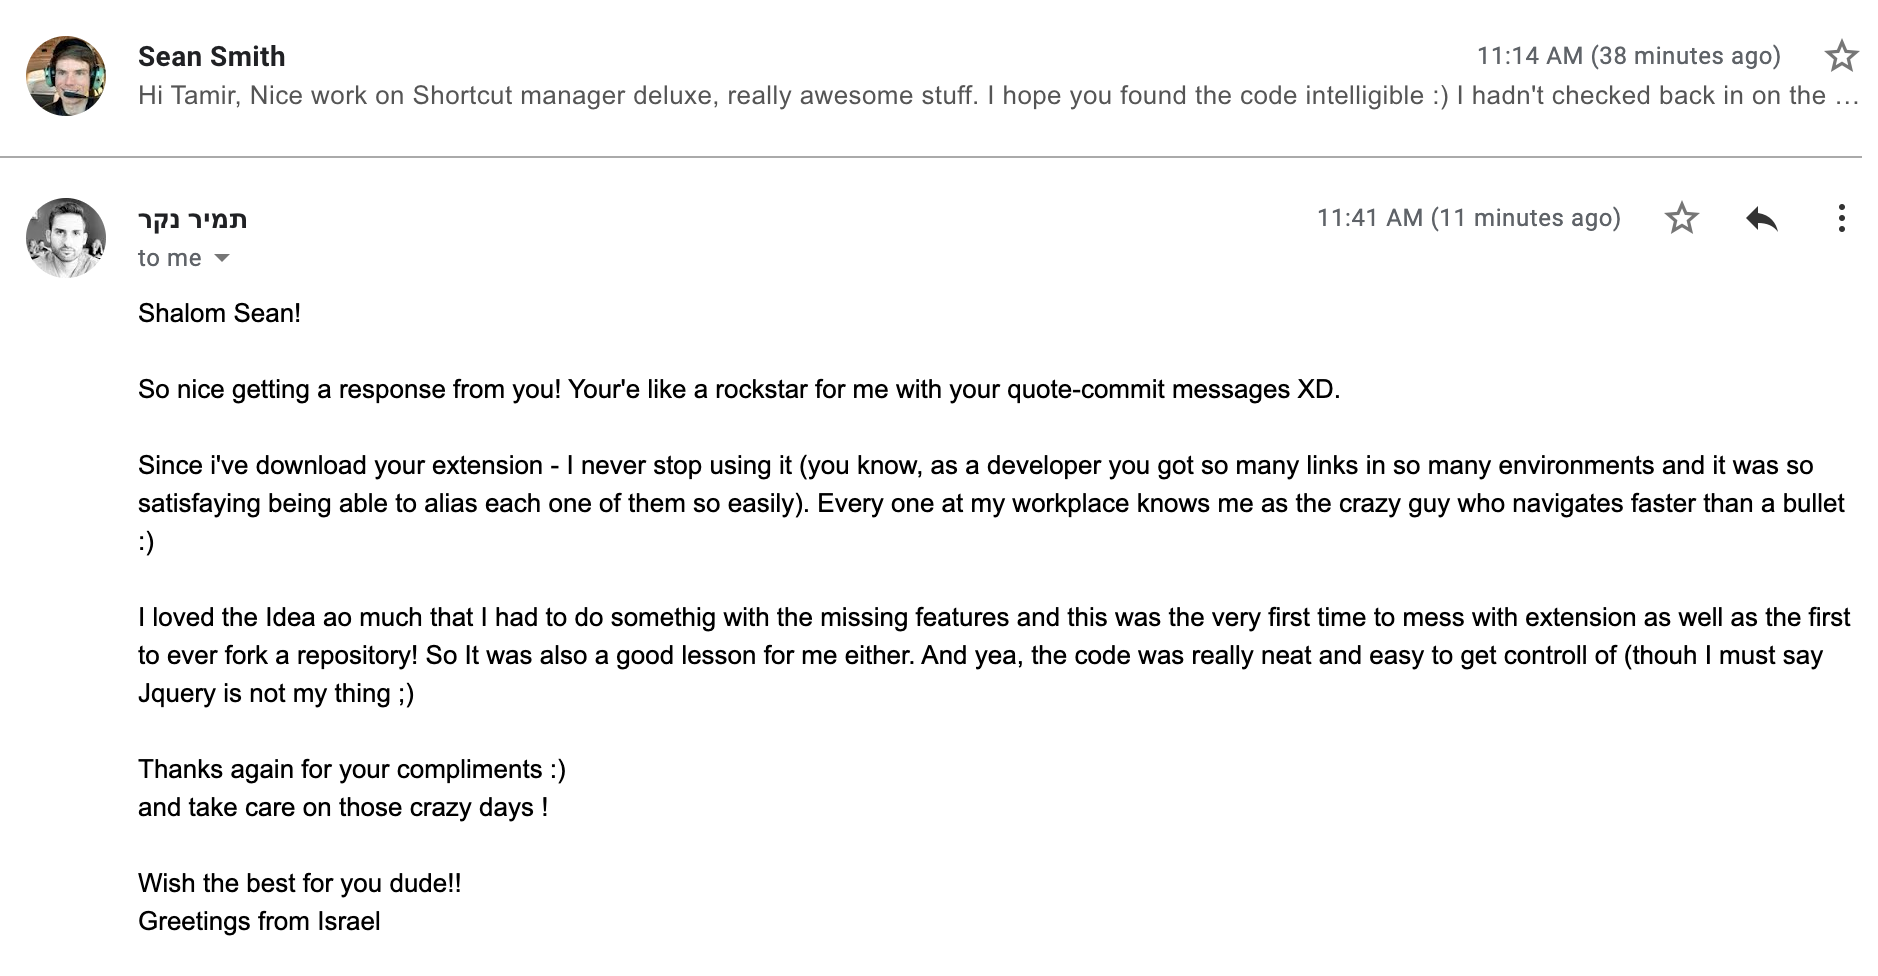 Email Response from the developer